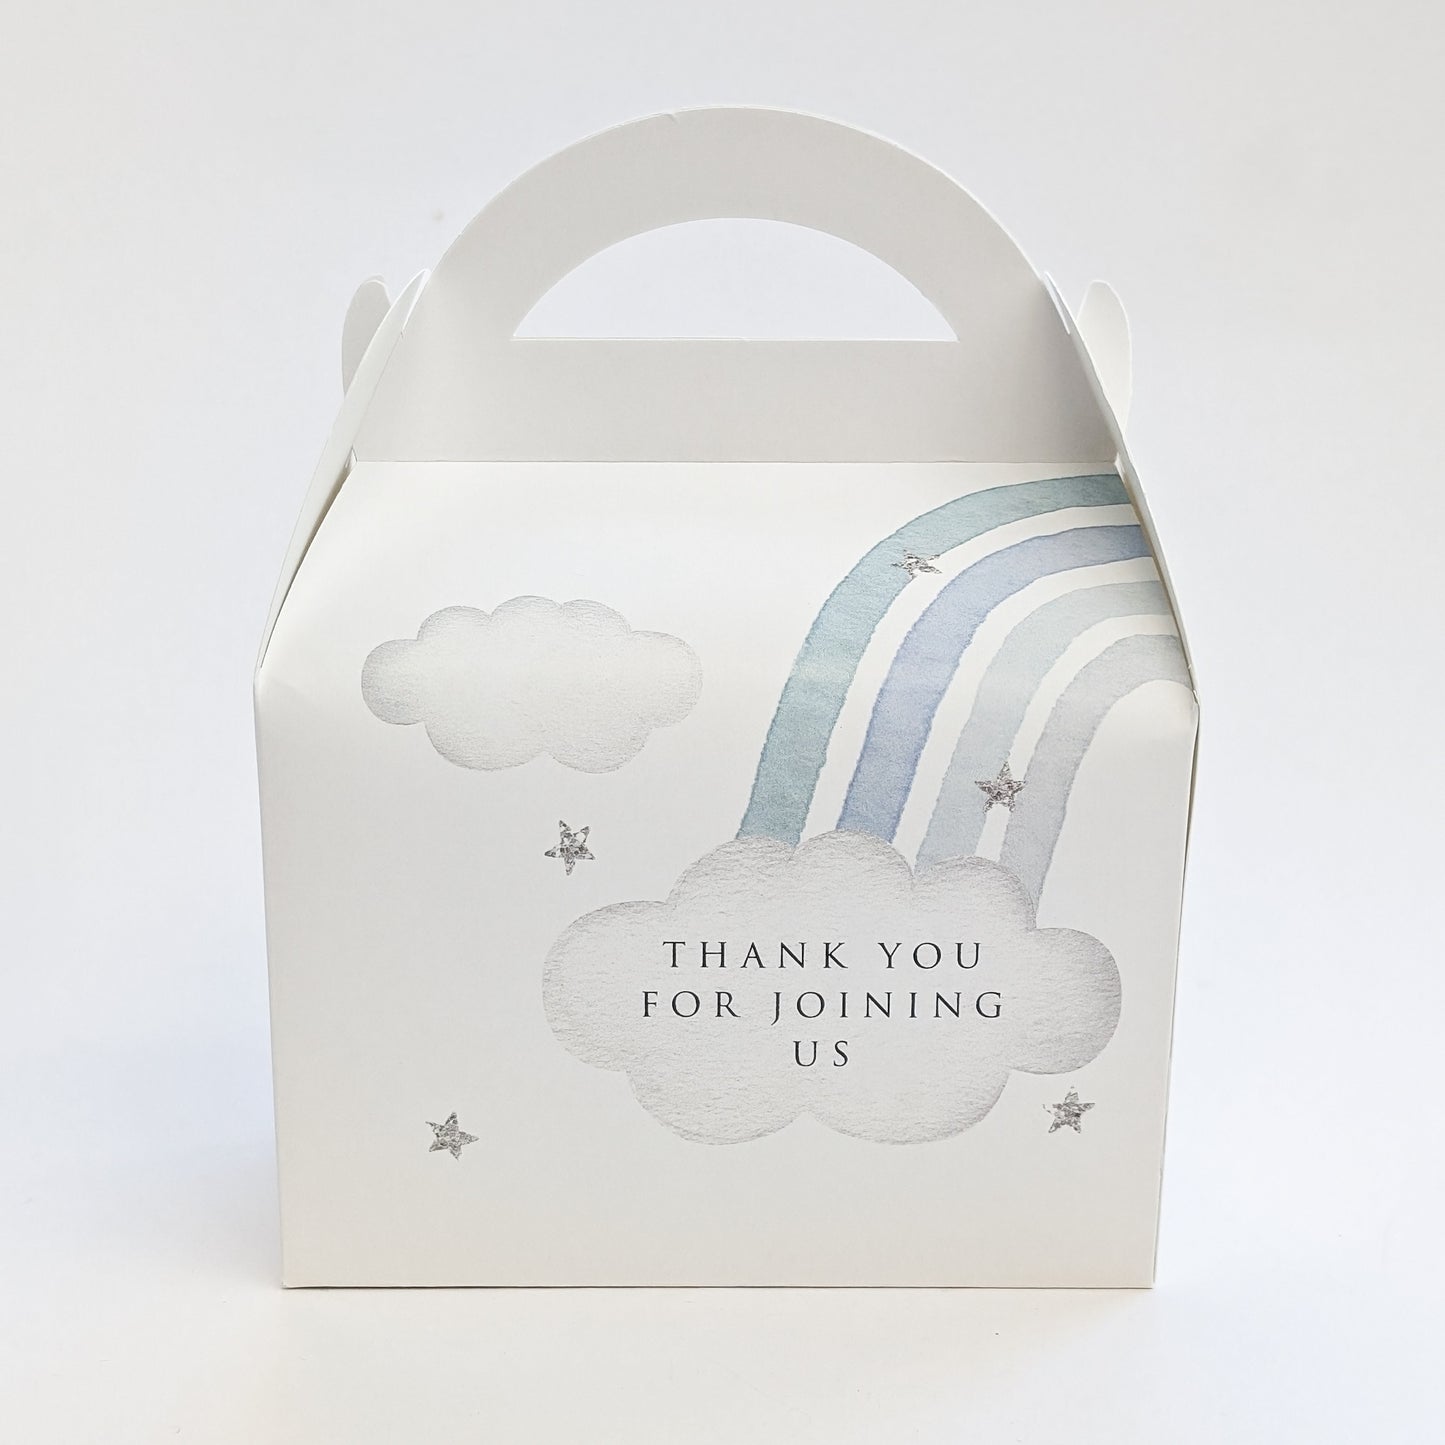 RAINBOW Minimal Baptism Christening First Birthday Personalised Children’s Party Box Gift Bag Favour